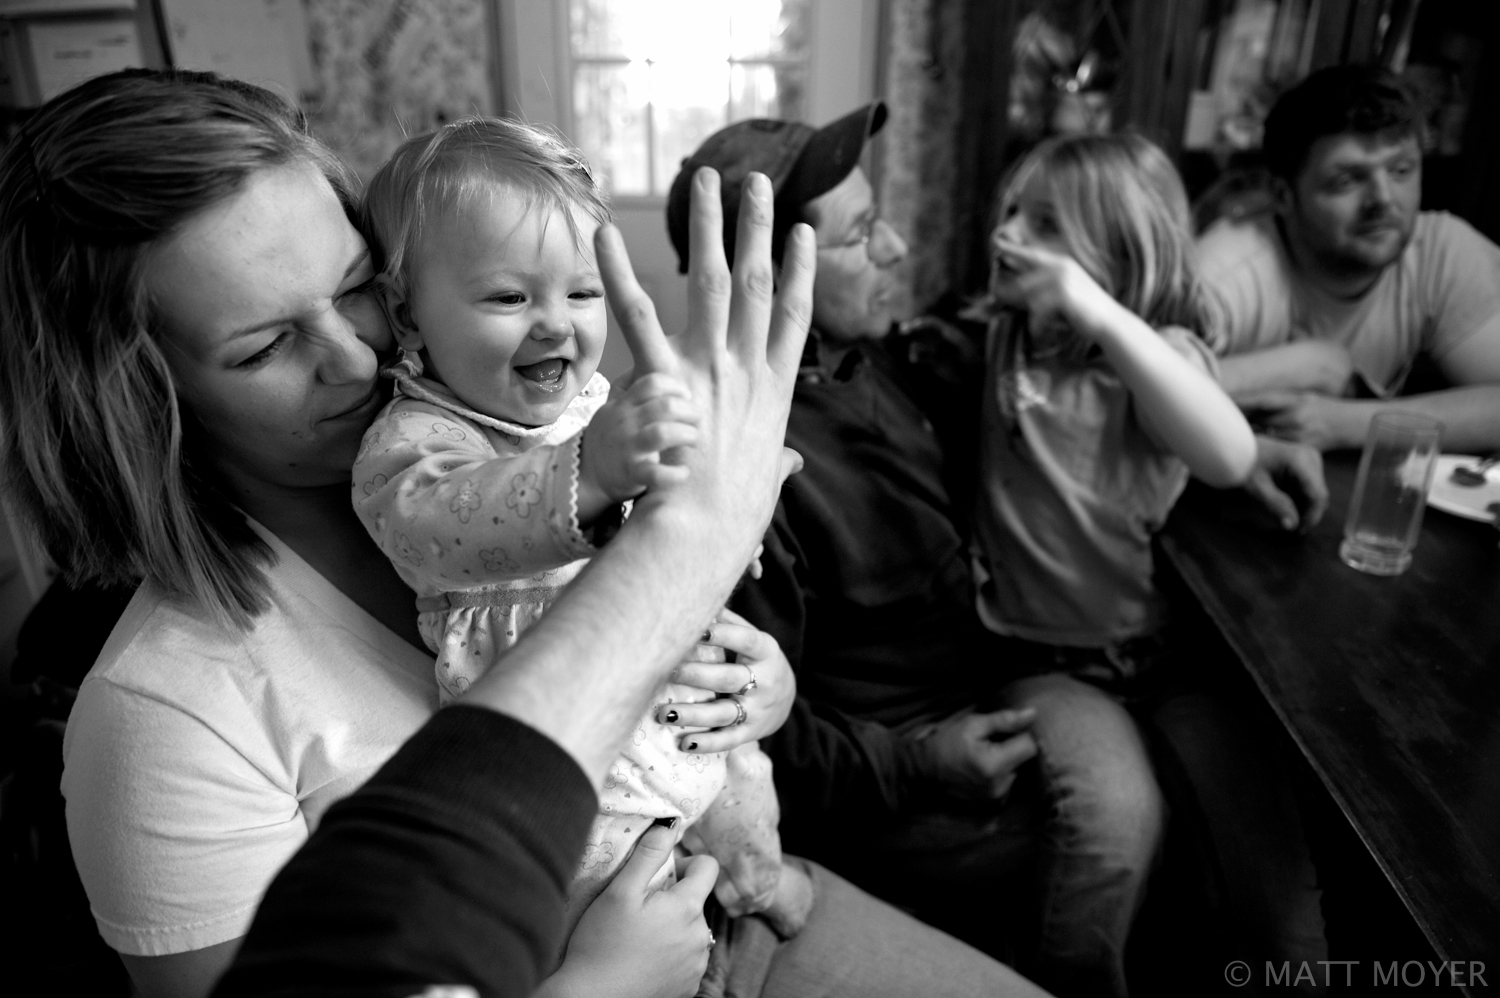  Jessica Tidd holds her niece, Leah, as Joe Tidd, Jessica's father, holds his granddaughter, Emma, during a Sunday family dinner in Auburn, NY. 